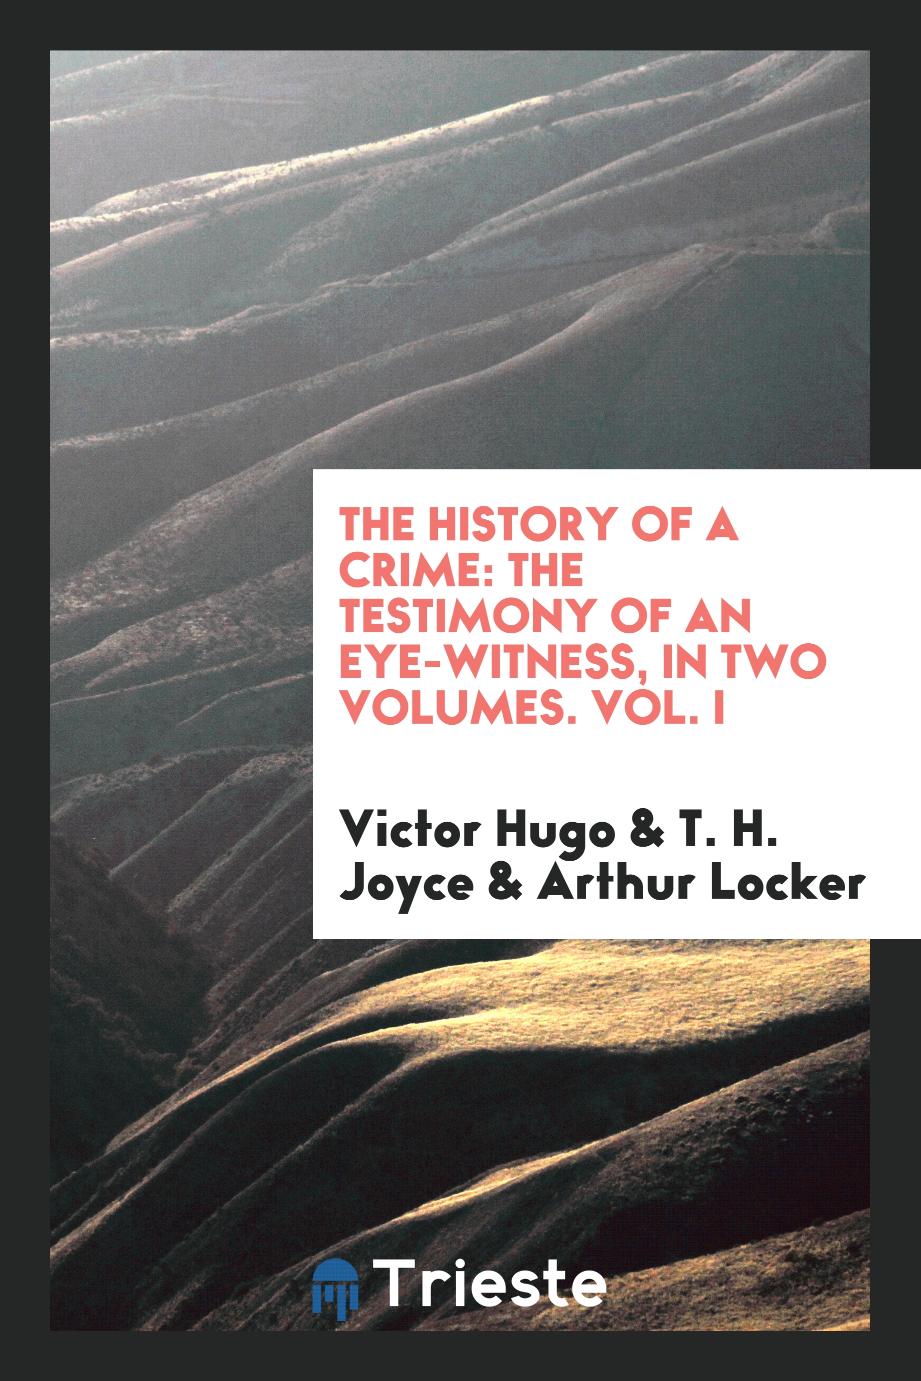 The History of a Crime: The Testimony of an Eye-Witness, in Two Volumes. Vol. I